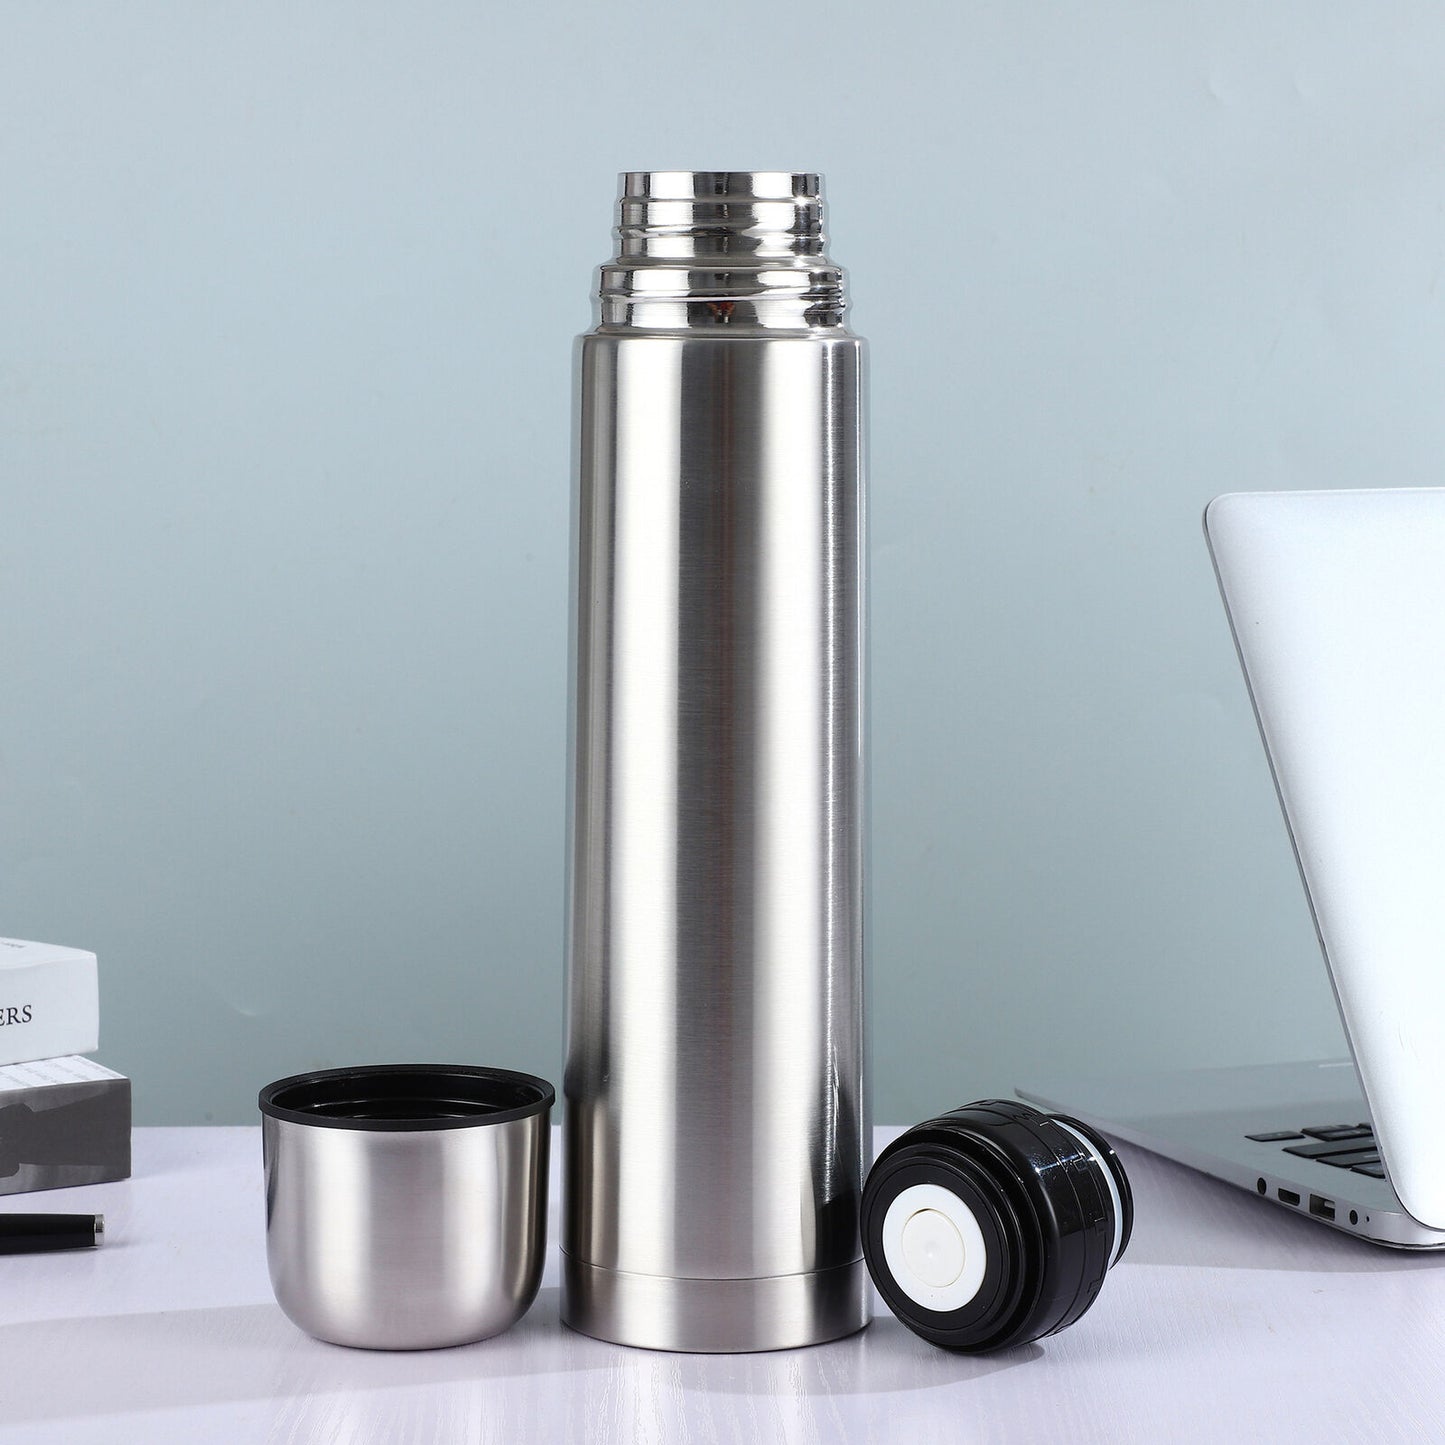 0.75L/1L STAINLESS STEEL VACUUM FLASK HOT COLD TEA DRINK THERMOS CAMPING TRAVEL